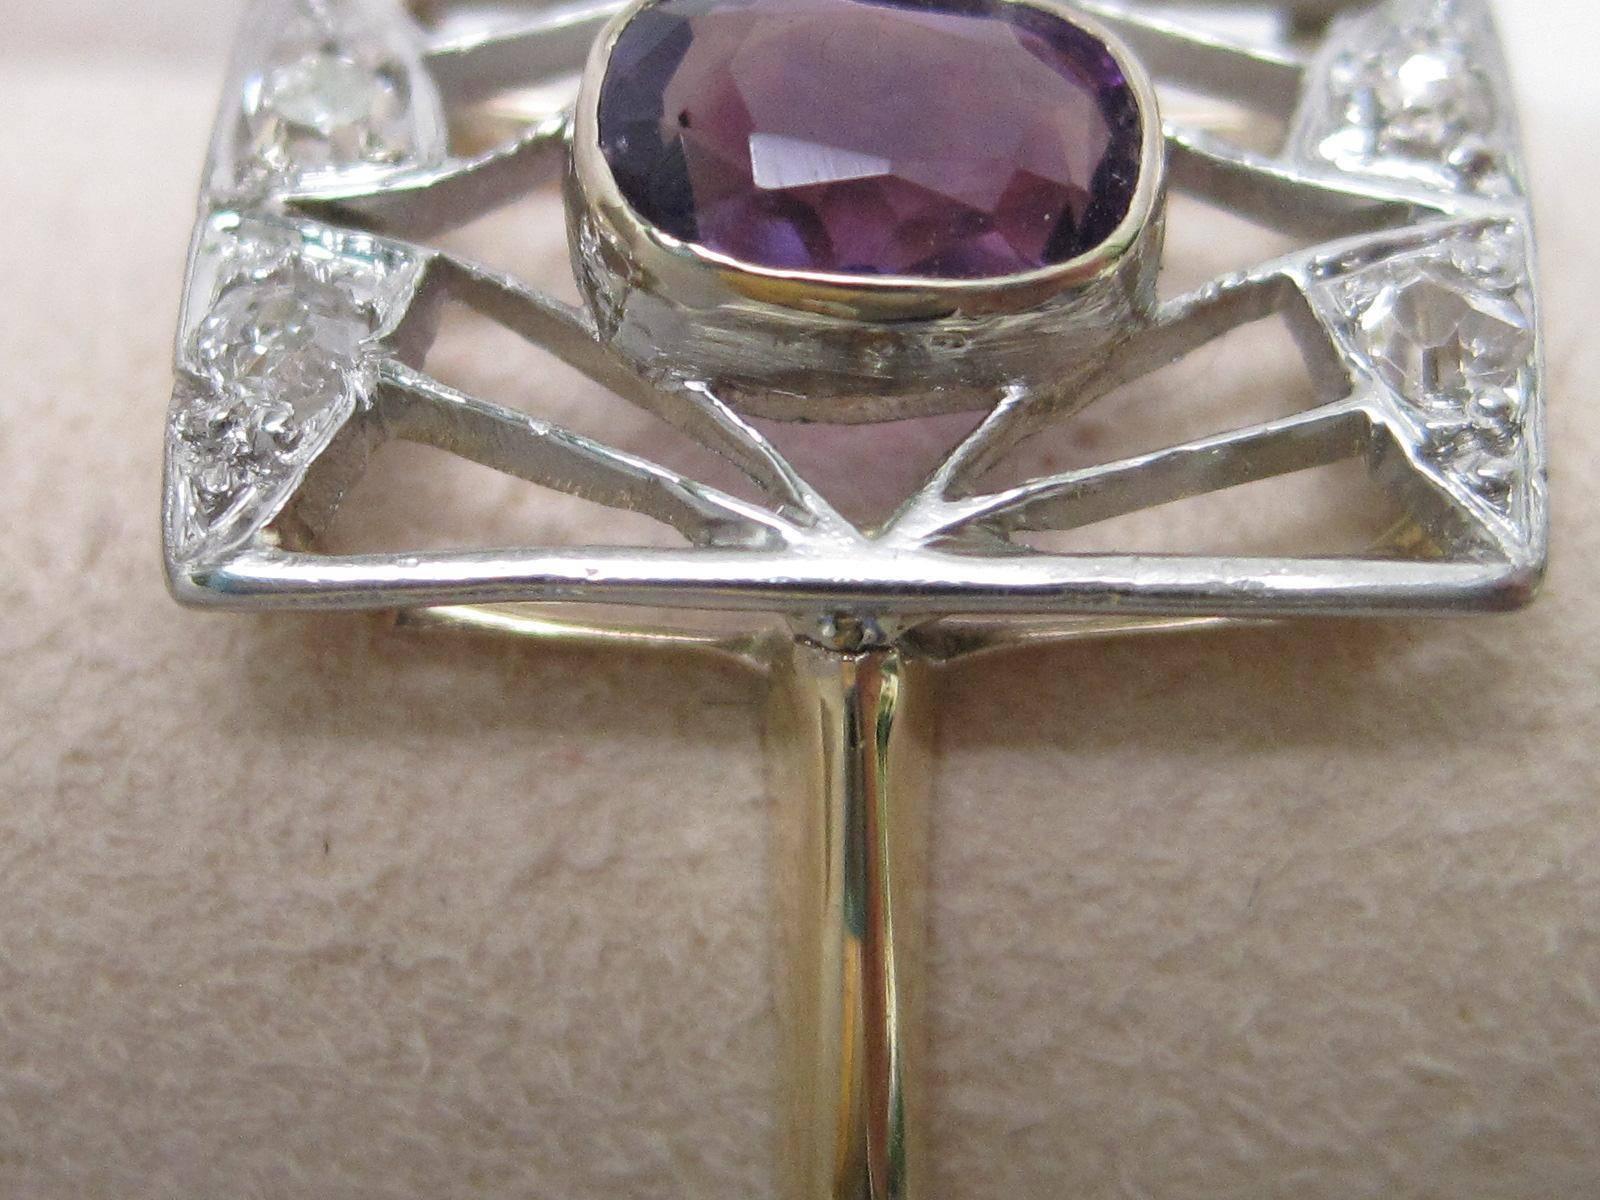 This circa 1910 Edwardian ring features a beautiful center amethyst and four old mine cut diamonds, all set in platinum over gold.

The light and dainty construction makes a perfect ring for the women searching for a right hand ring, or birthstone